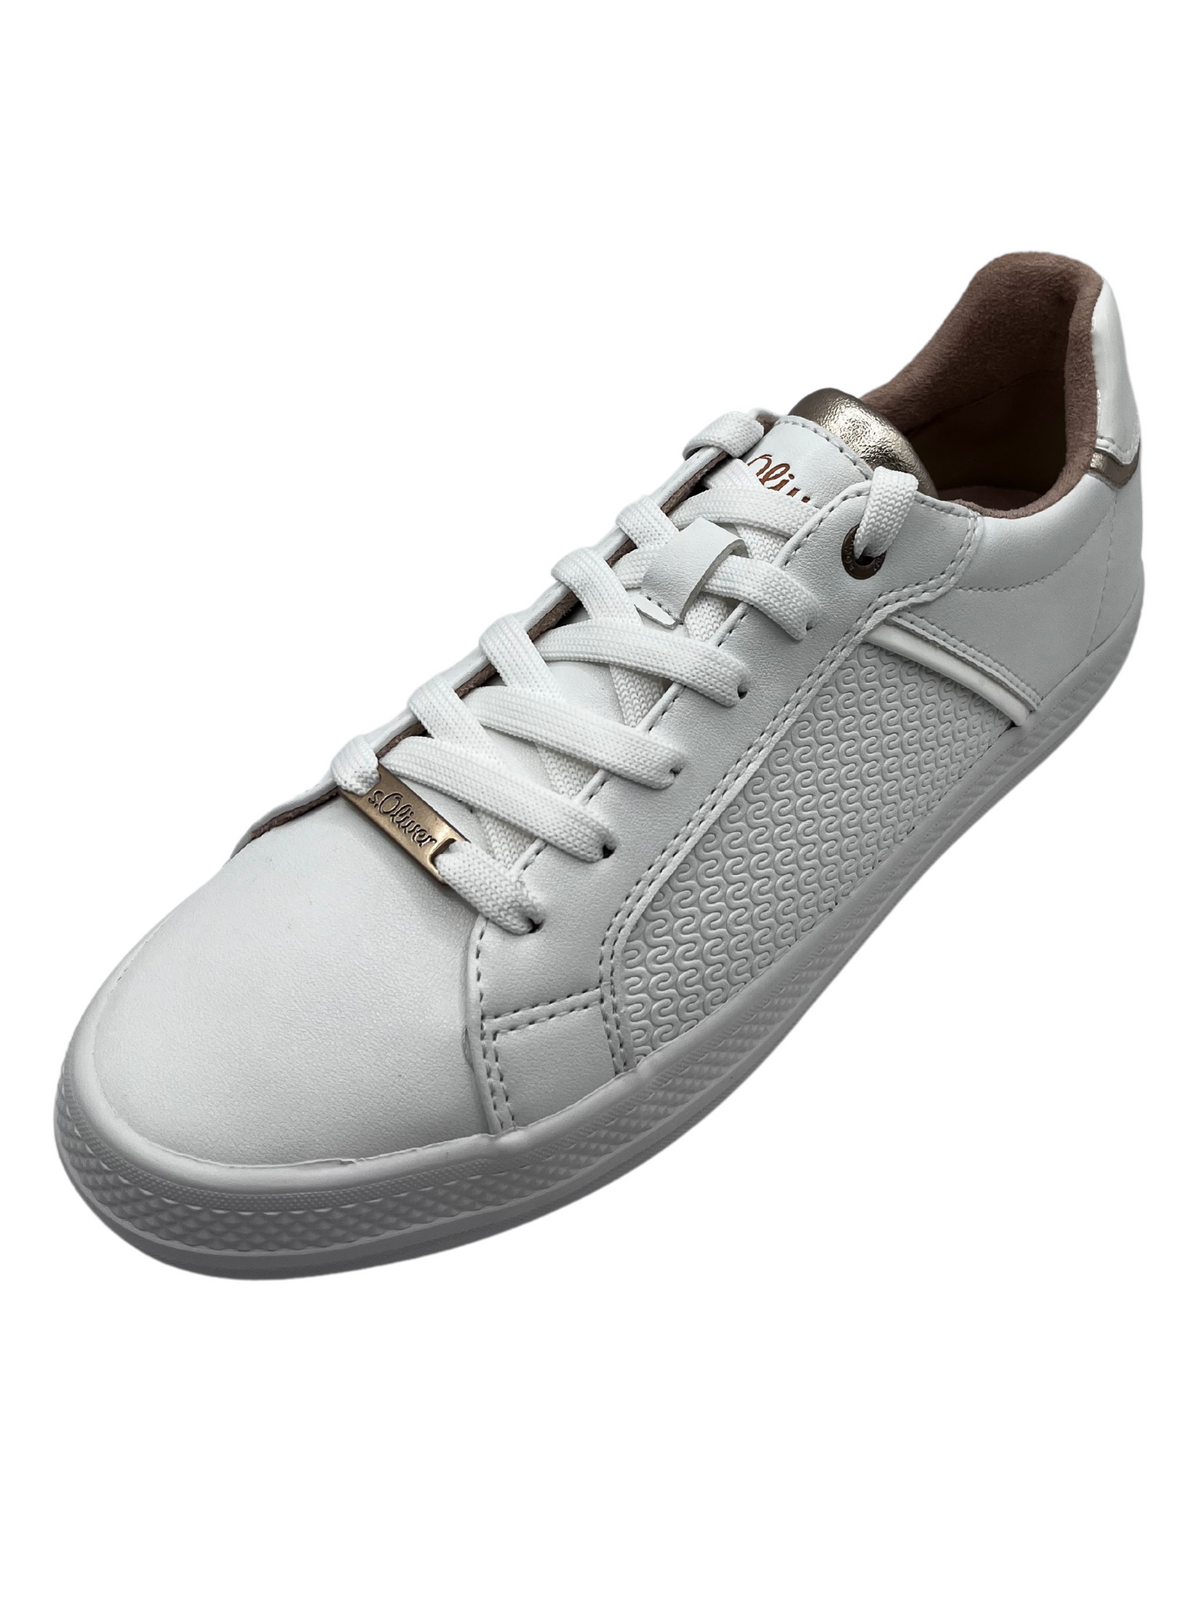 S Oliver White Trainers With Gold Details and Swirl Side Design